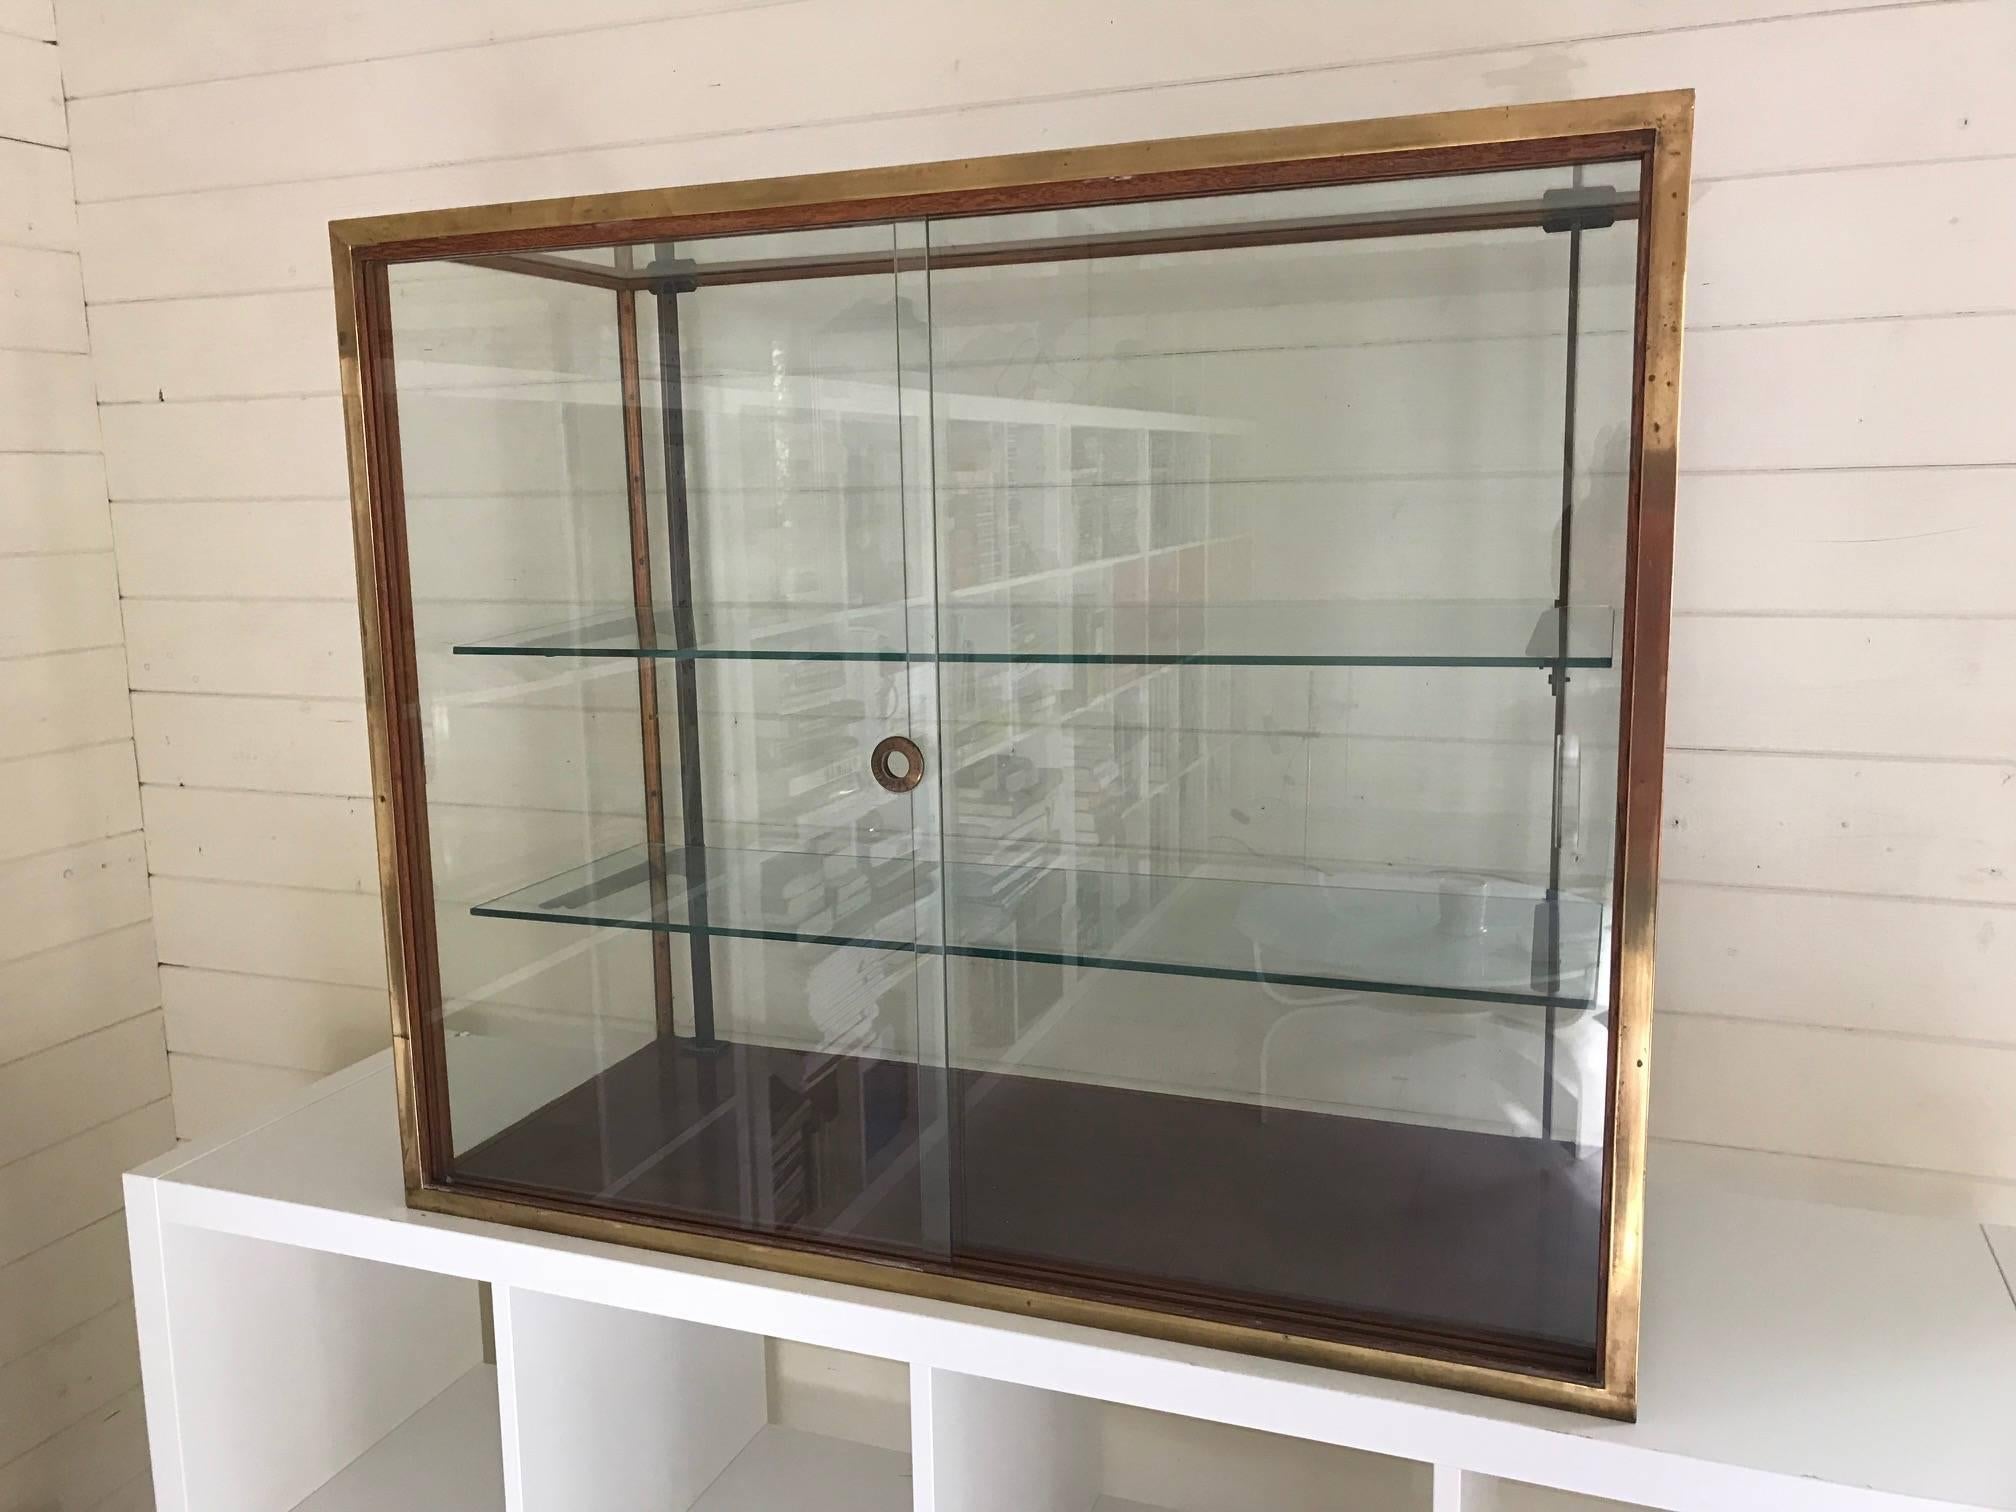 A great quality brass, wood and glass vtrine. Two sliding doors and shelves. Patent mark to the sliding integrated door handle. Shelves and doors are removable for transport. There are some chips to the glass shelves and corners of the doors. If the